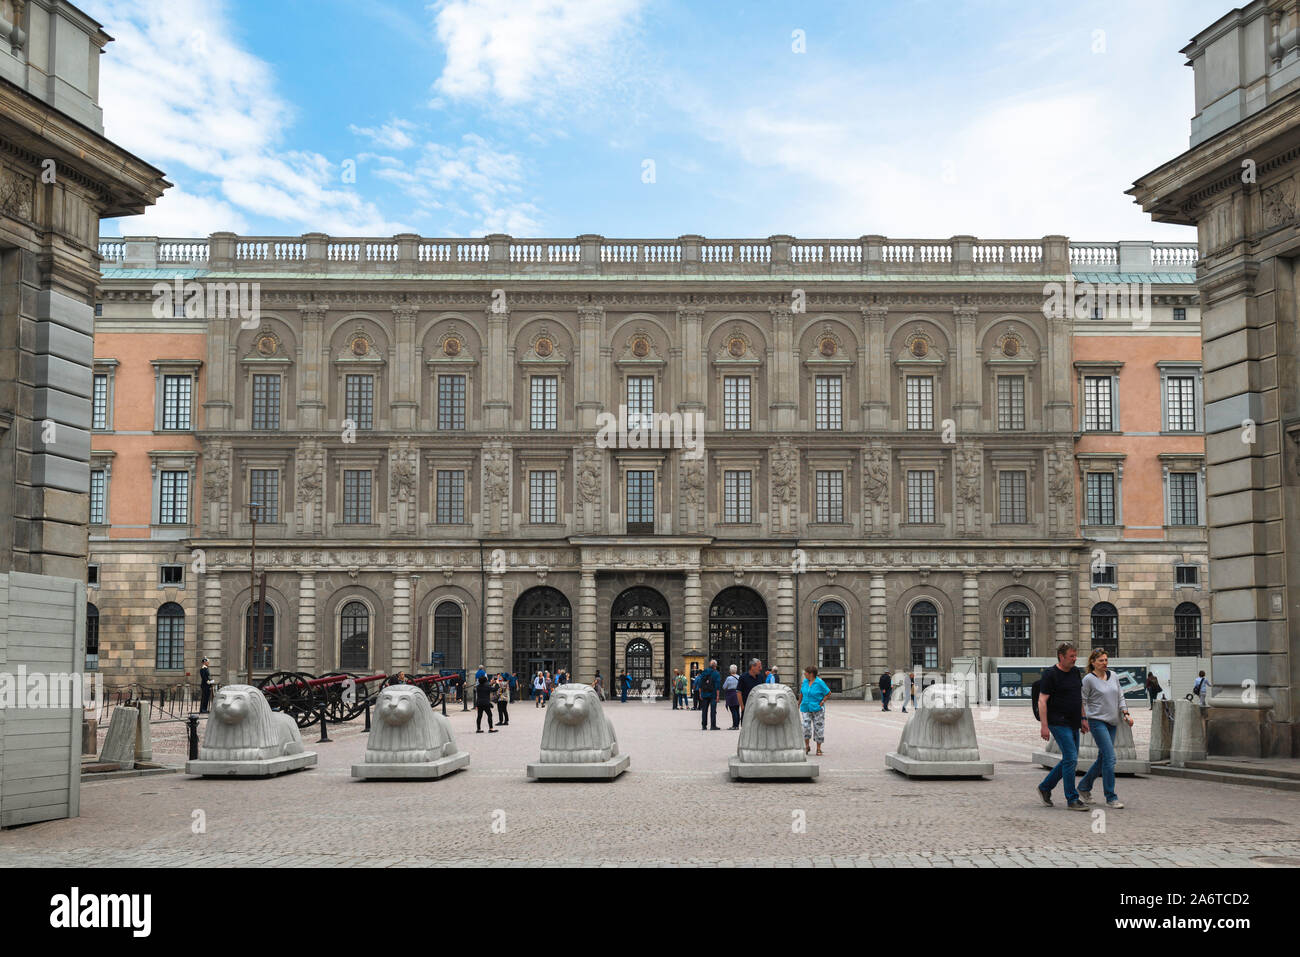 Stockholm Royal Palace, view of the courtyard and west front of the Swedish Royal Palace (Kungliga Slottet), Gamla Stan, Stockholm, Sweden Stock Photo